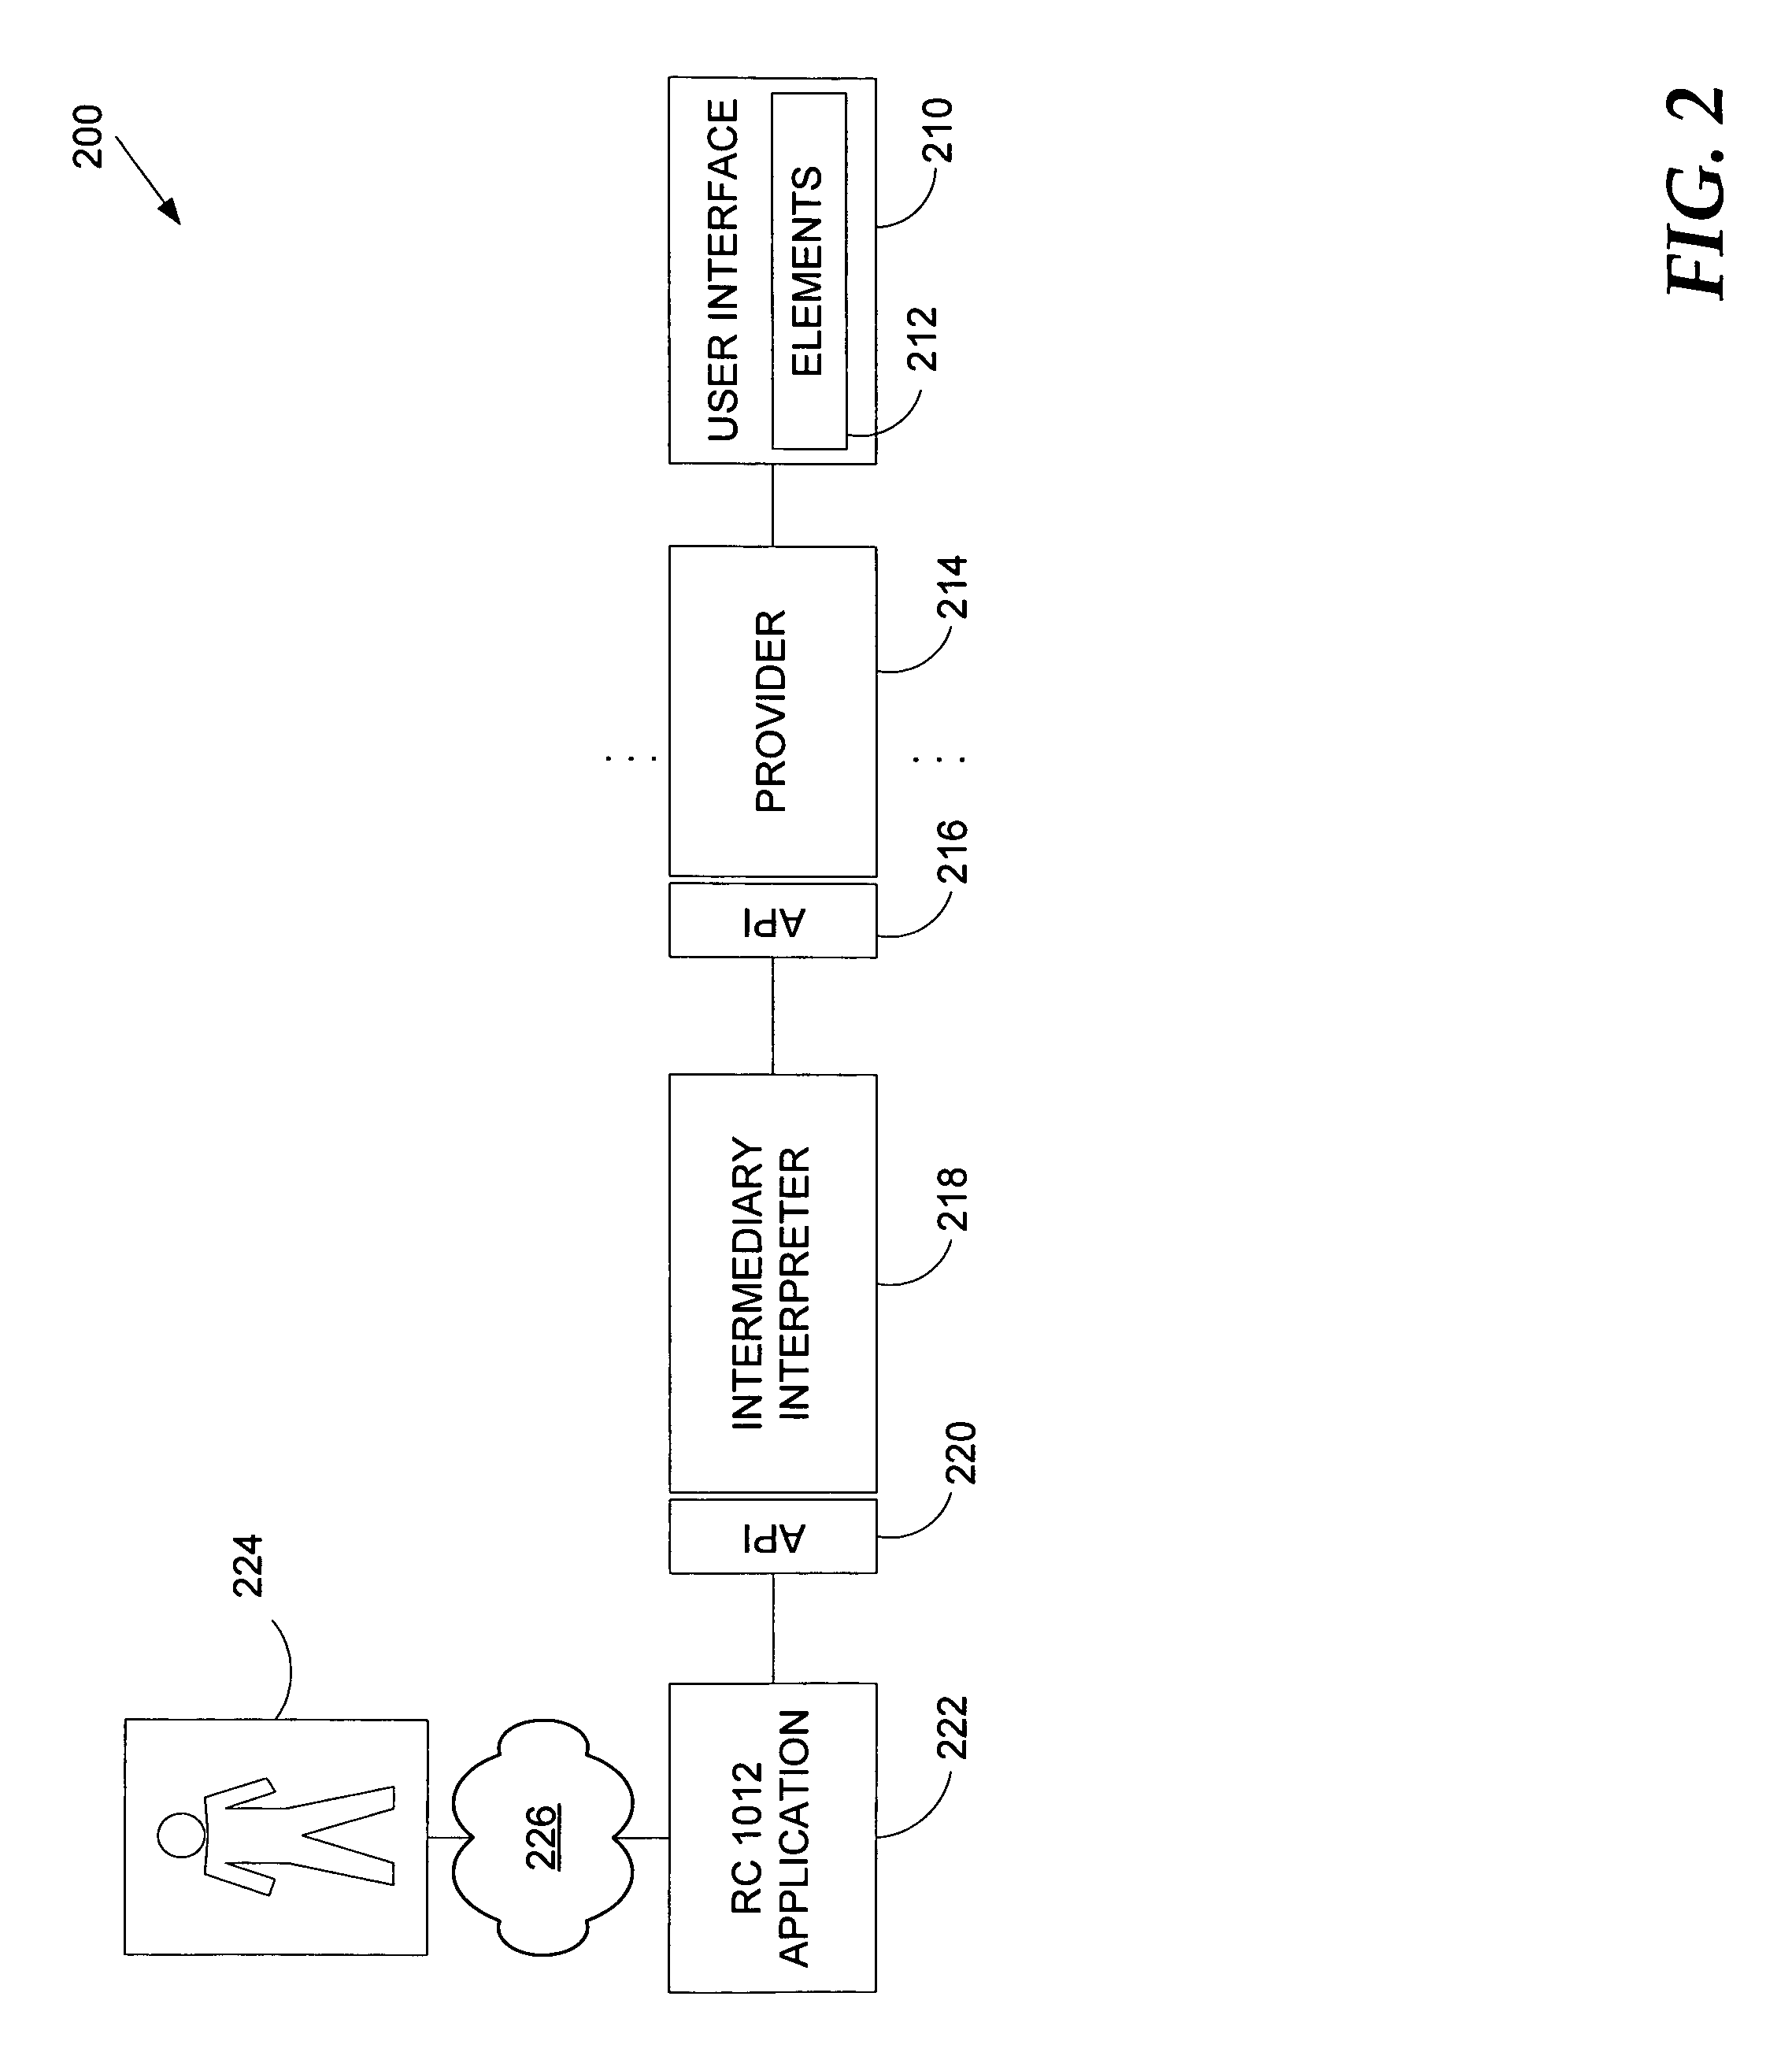 Method and system for providing information related to elements of a user interface